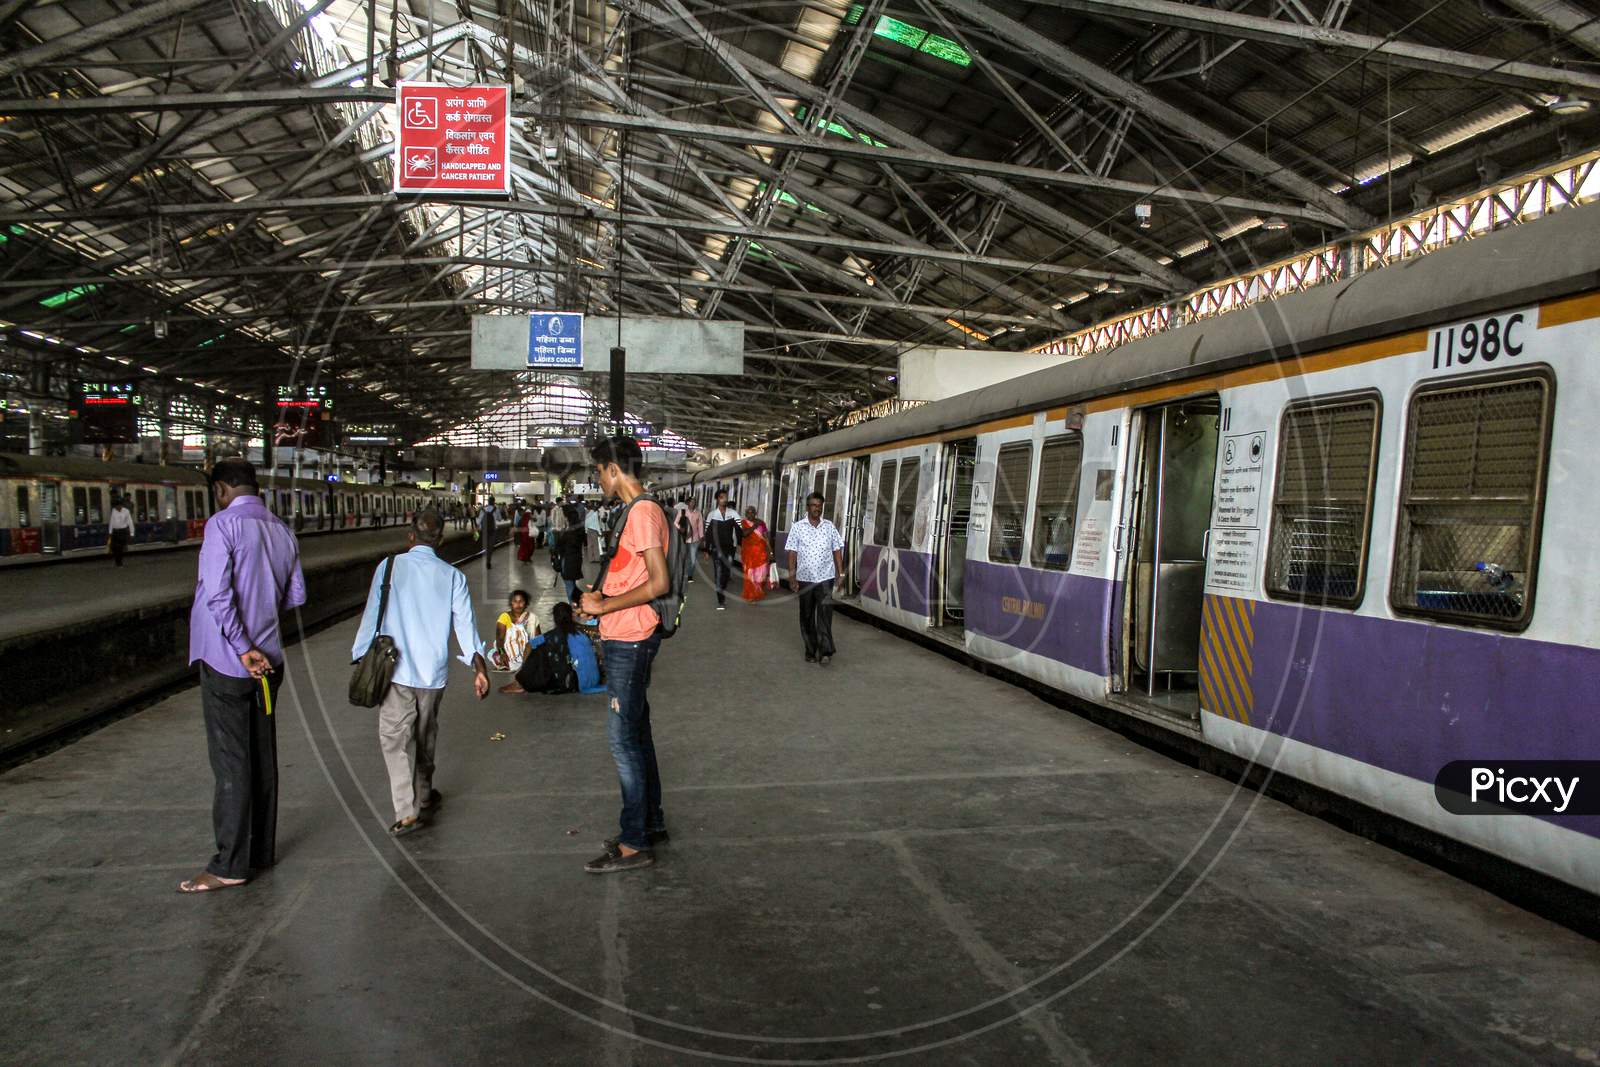 Mumbai, Maharashtra / India - June 2 2020: A Scene Of Mumbai Local At Cst Station Where People Stand In A Queue Maintains Social Distancing From Each Other During Lock Down Due To Corona Virus.